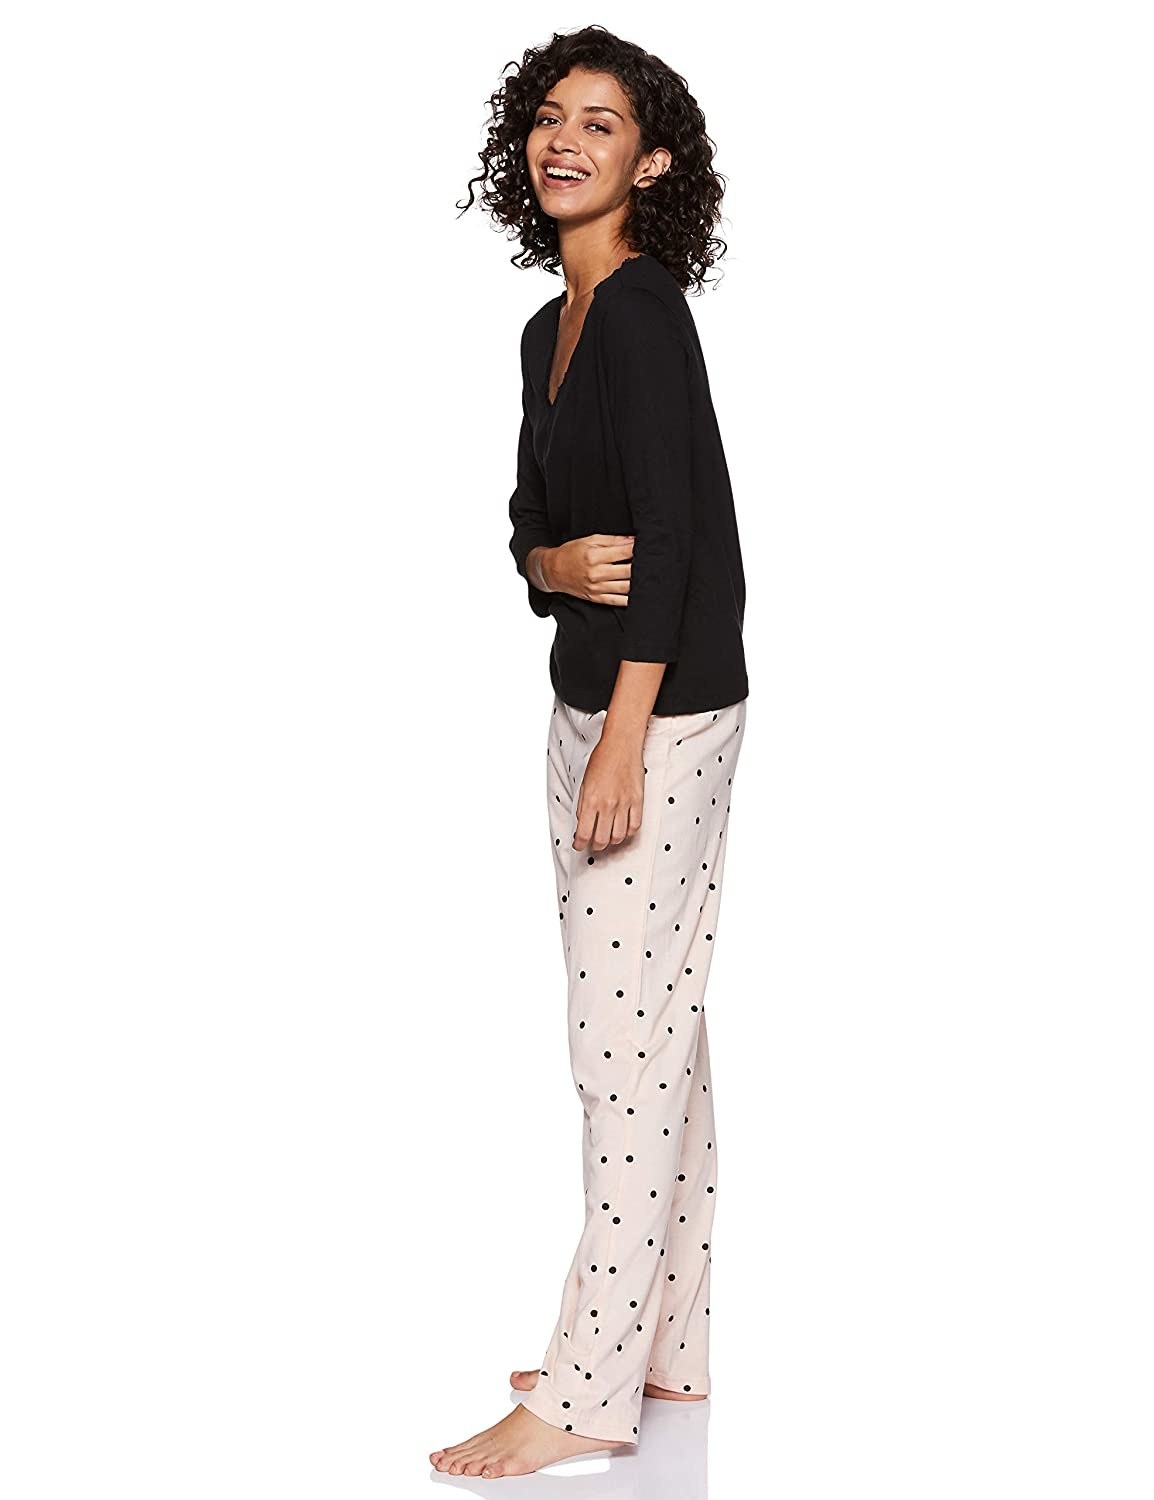 The set consists of a long-sleeved top and polka dotted pyjamas